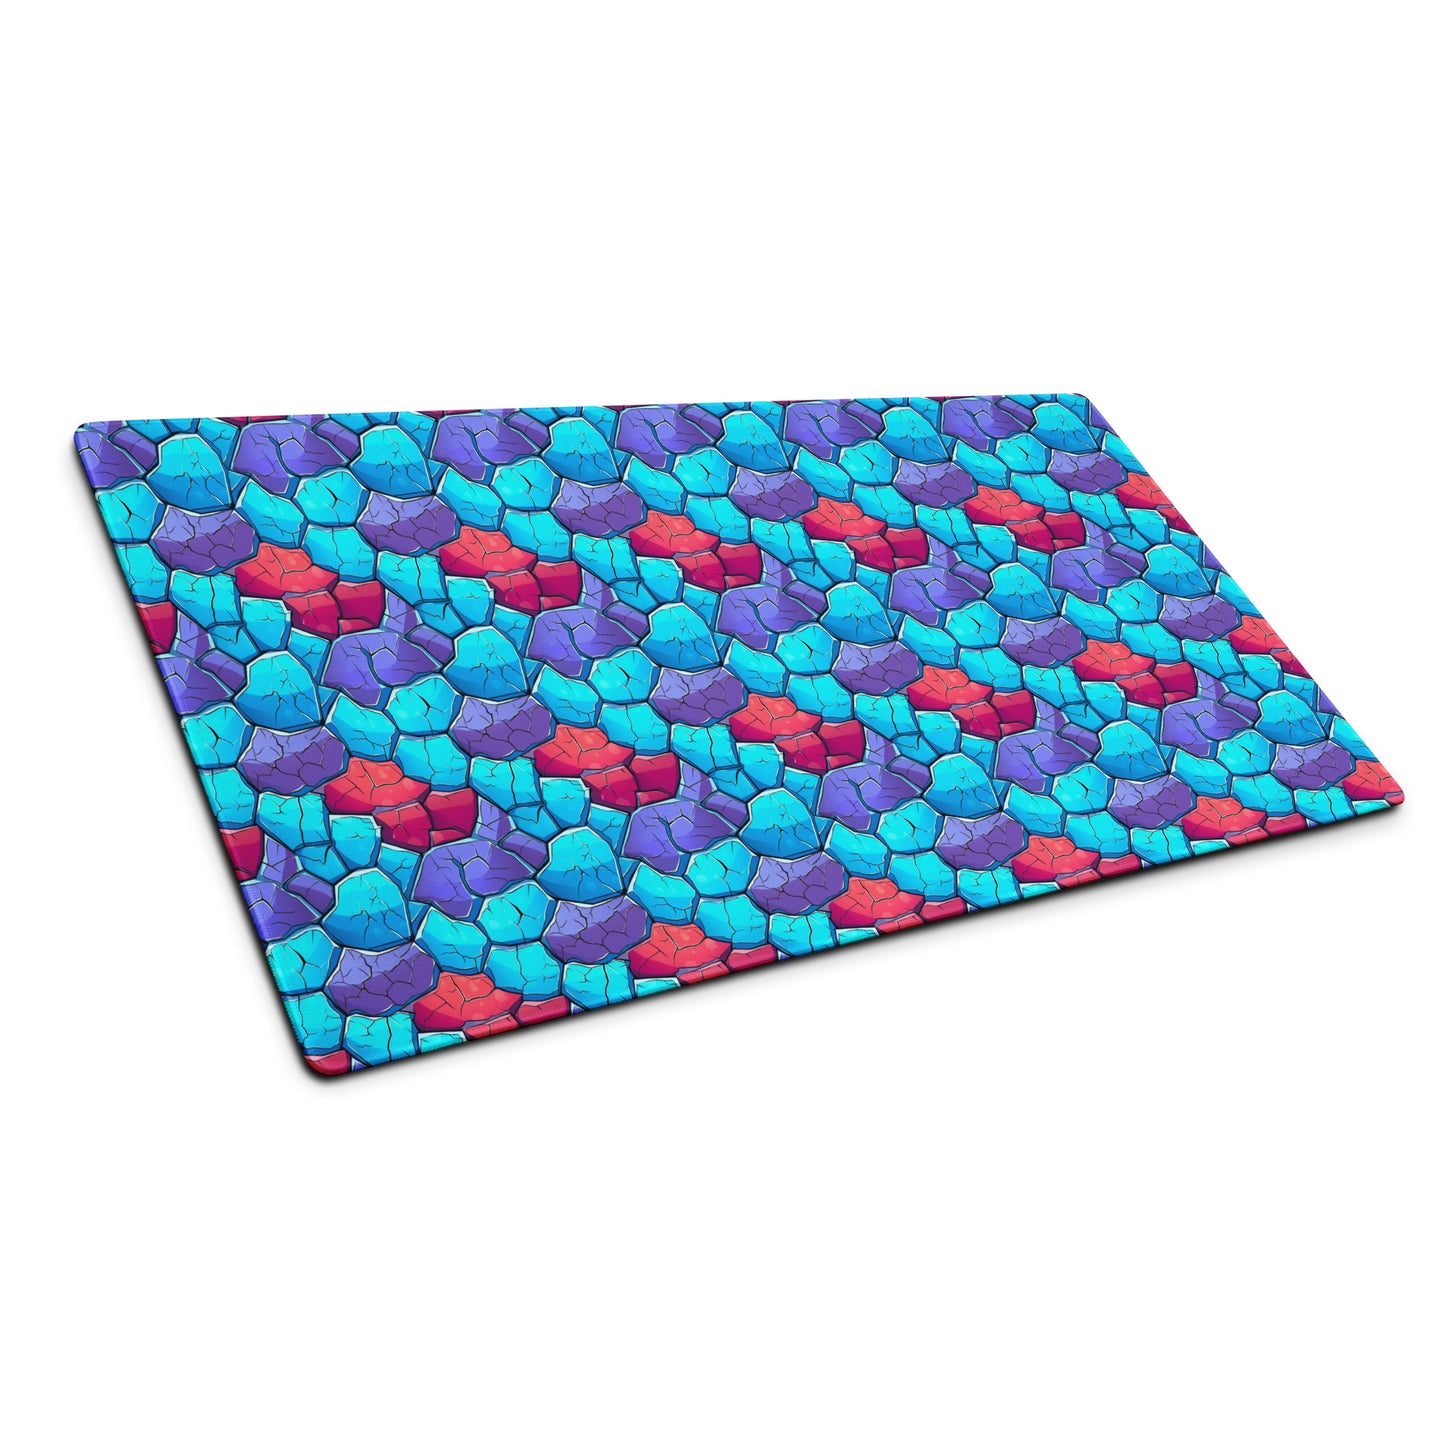 A 36" x 18" gaming desk pad with blue, red, and purple crystals sitting at an angle.